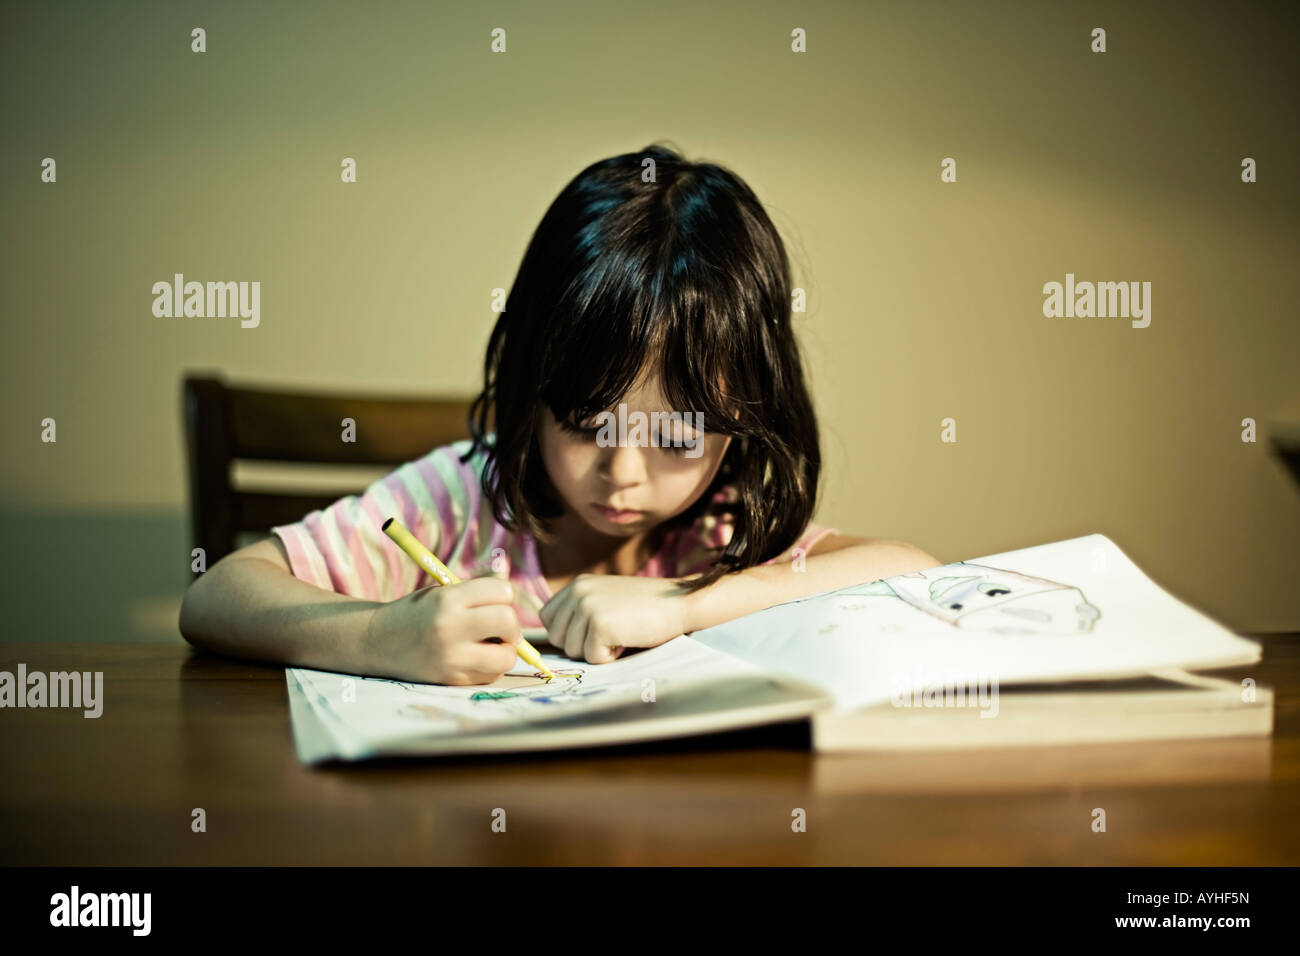 Girl four years old concentrates on her colouring book Stock Photo